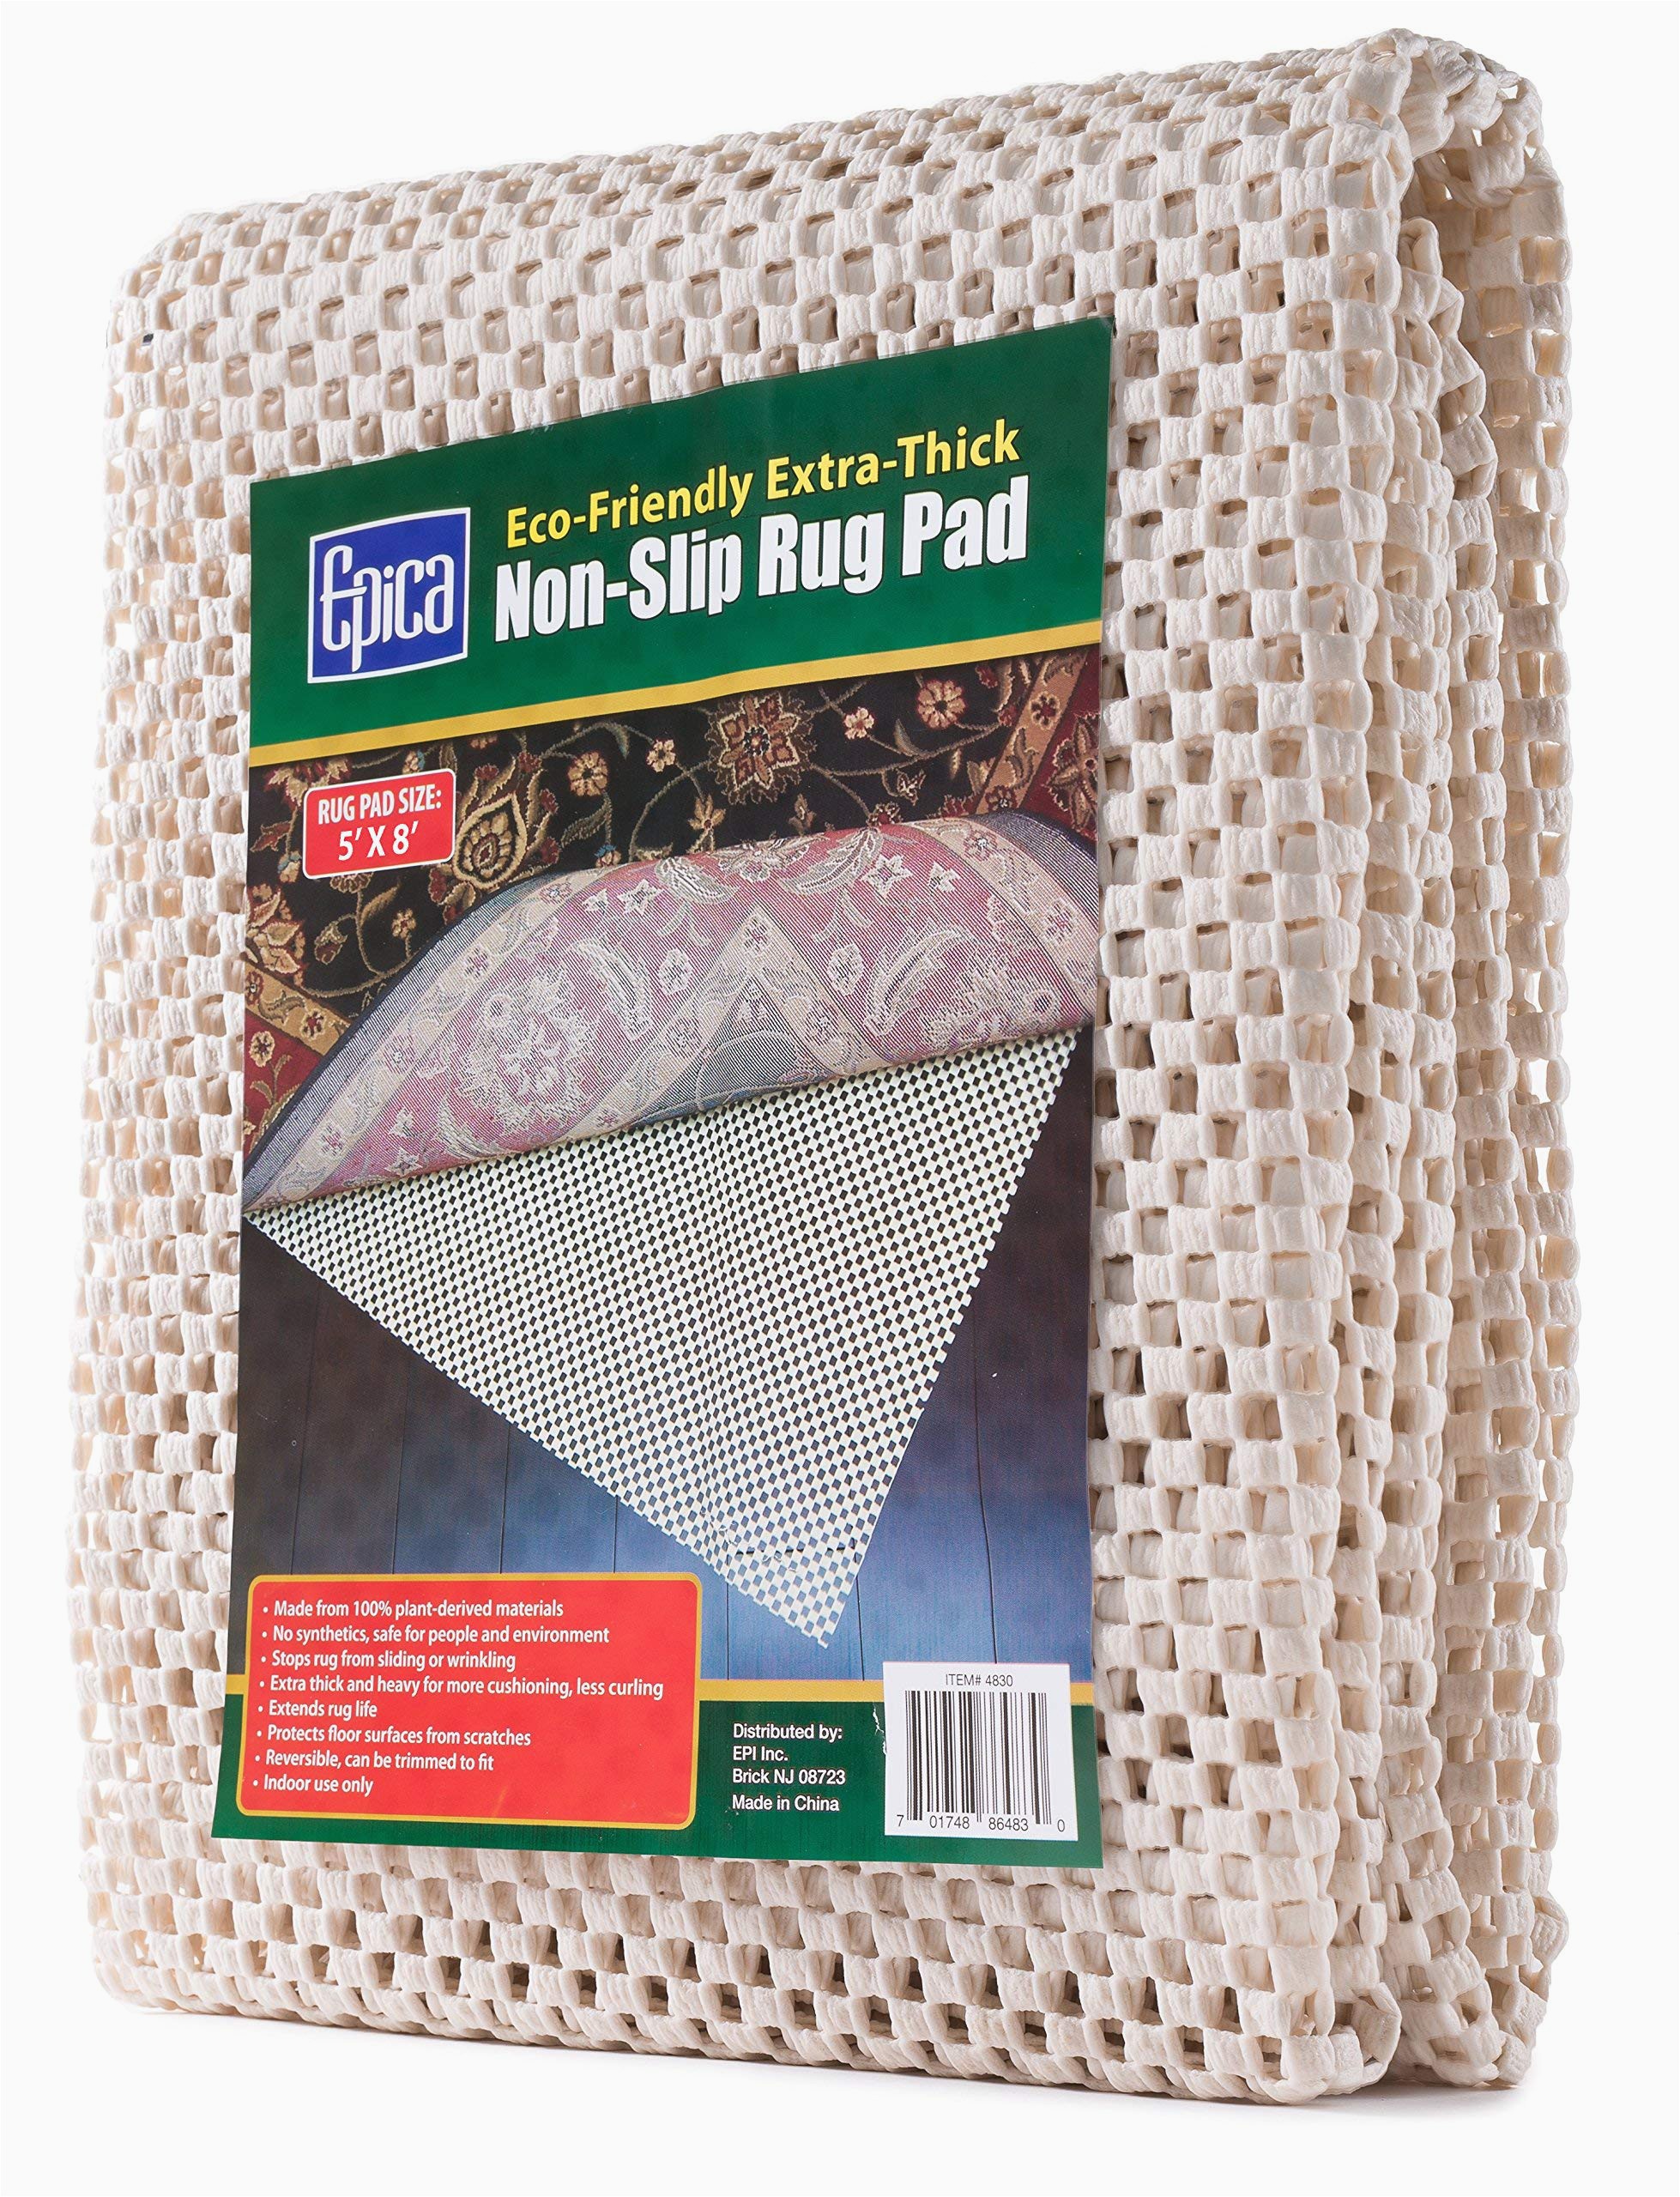 Non Skid area Rug Pad Epica Super Grip Non Slip area Rug Pad 5 X 8 for Any Hard Surface Floor Keeps Your Rugs Safe and In Place